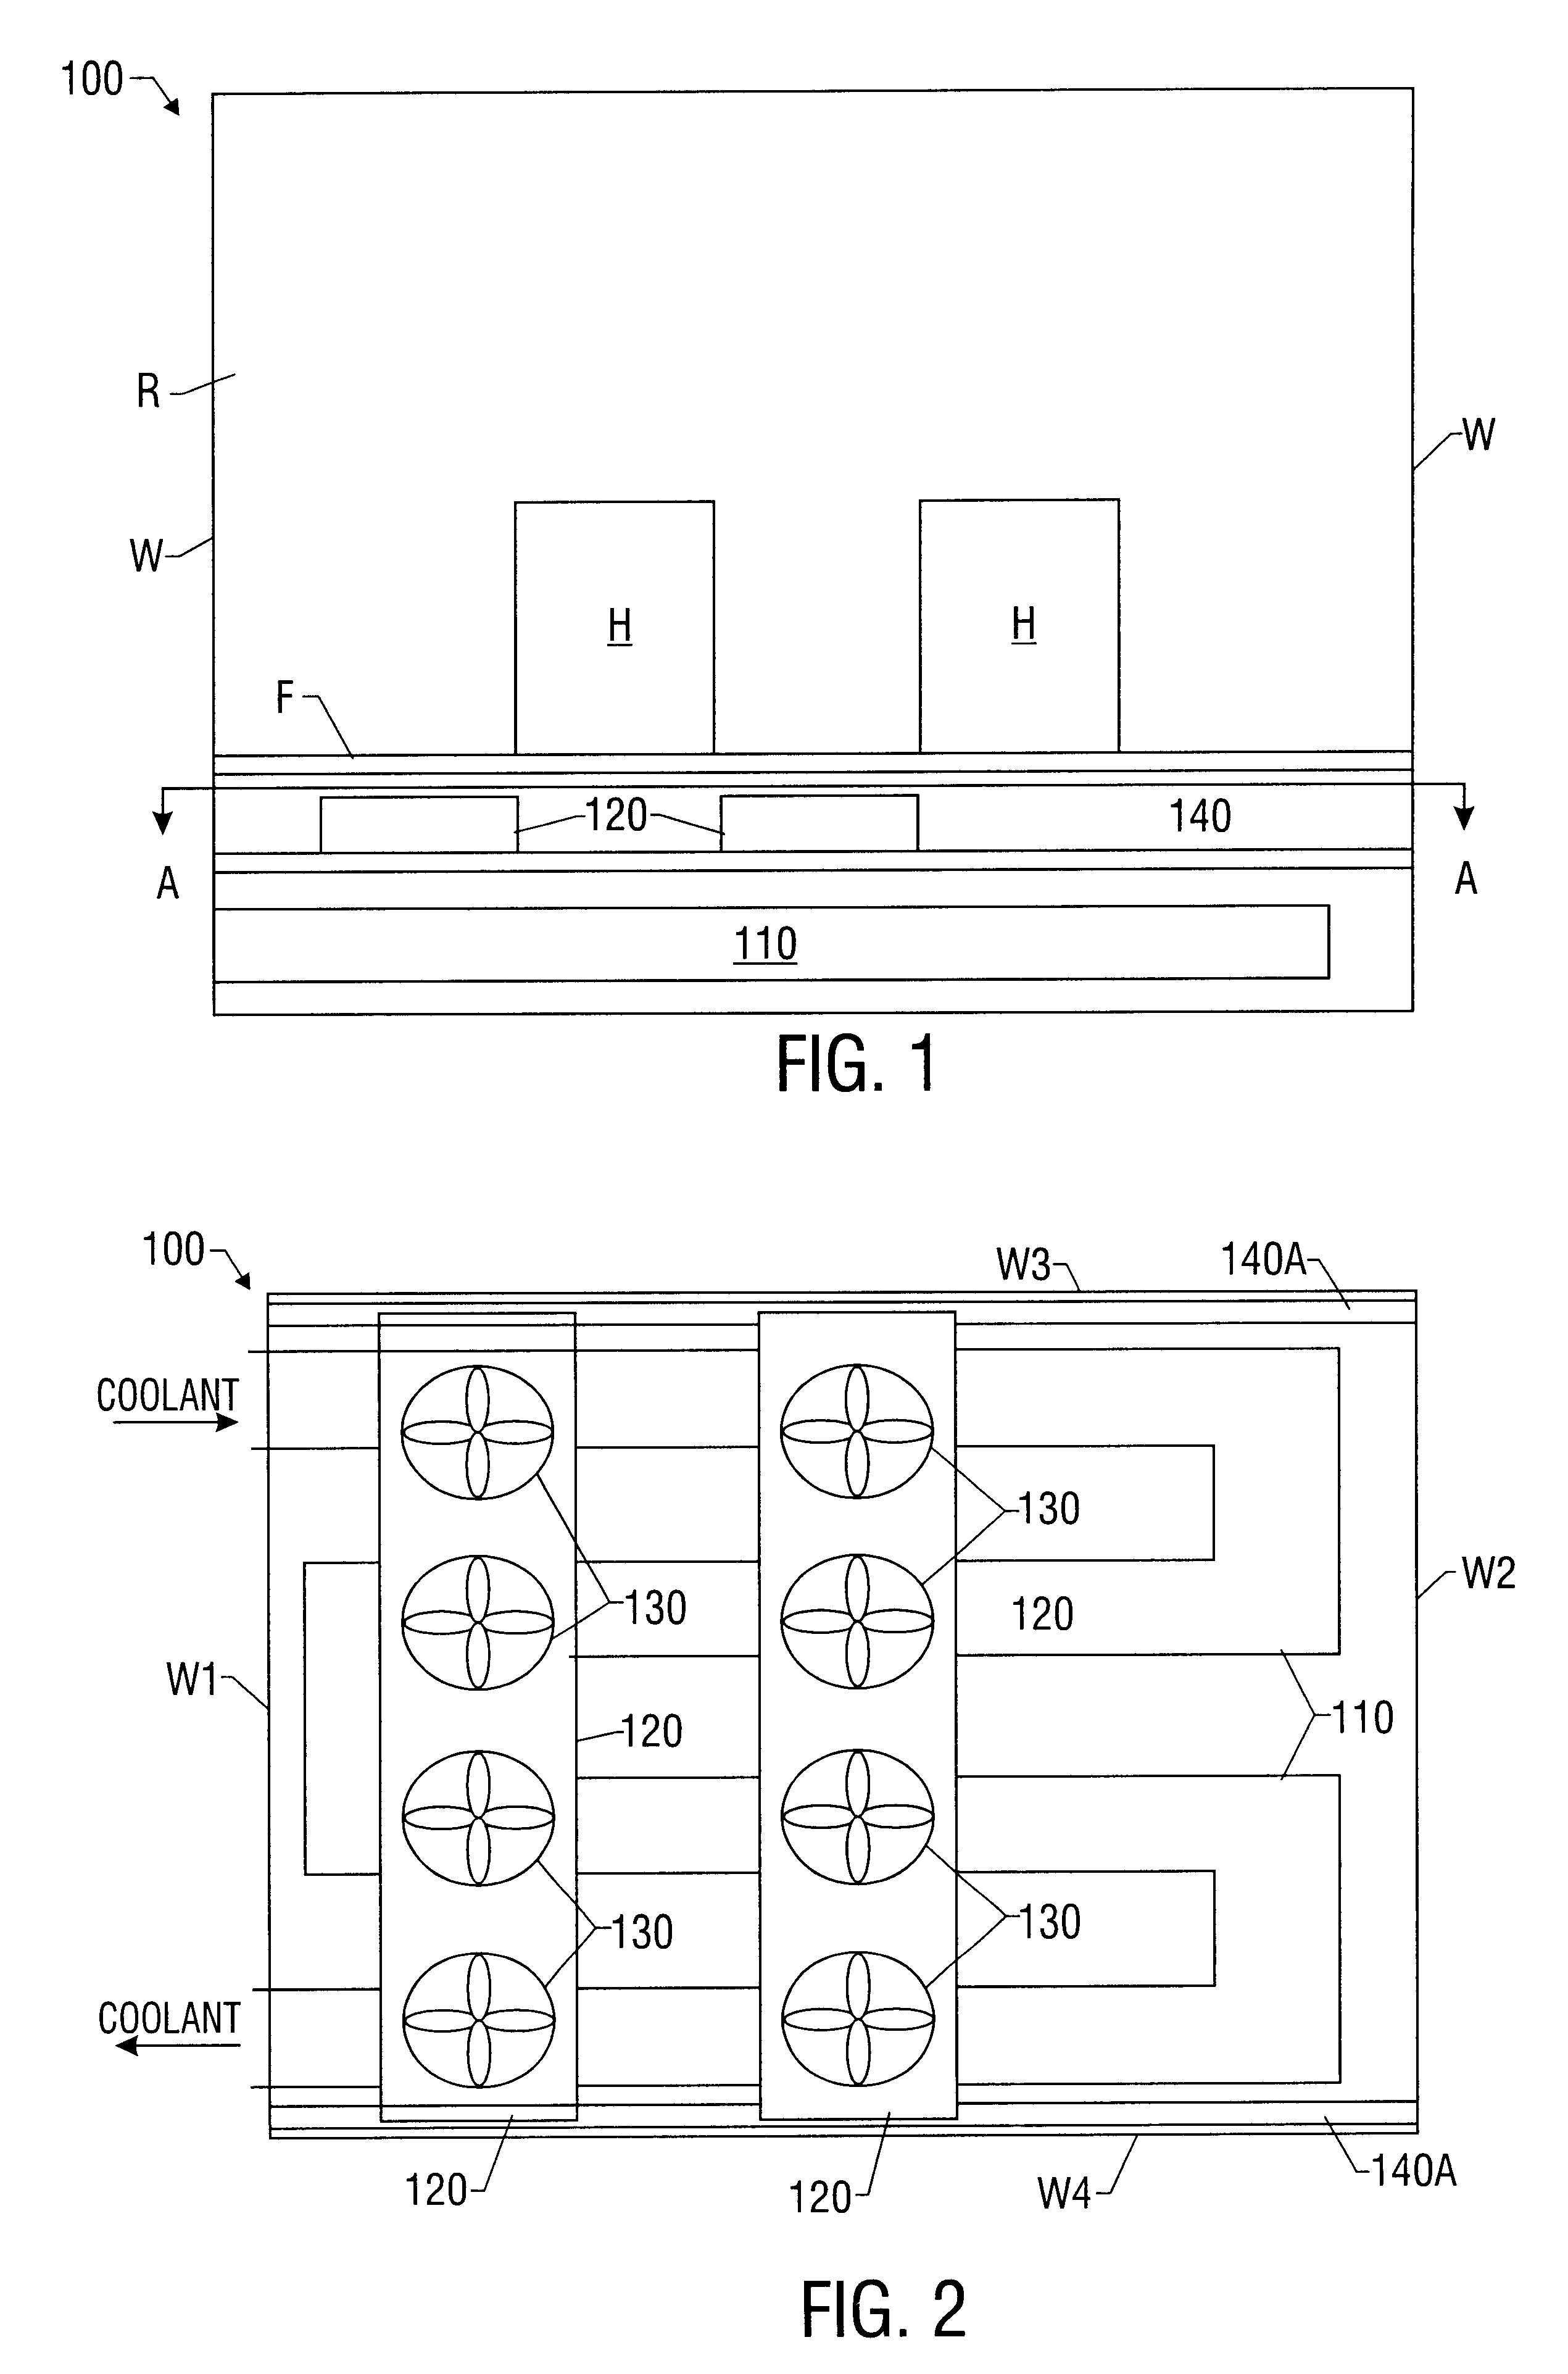 Configurable system and method for cooling a room